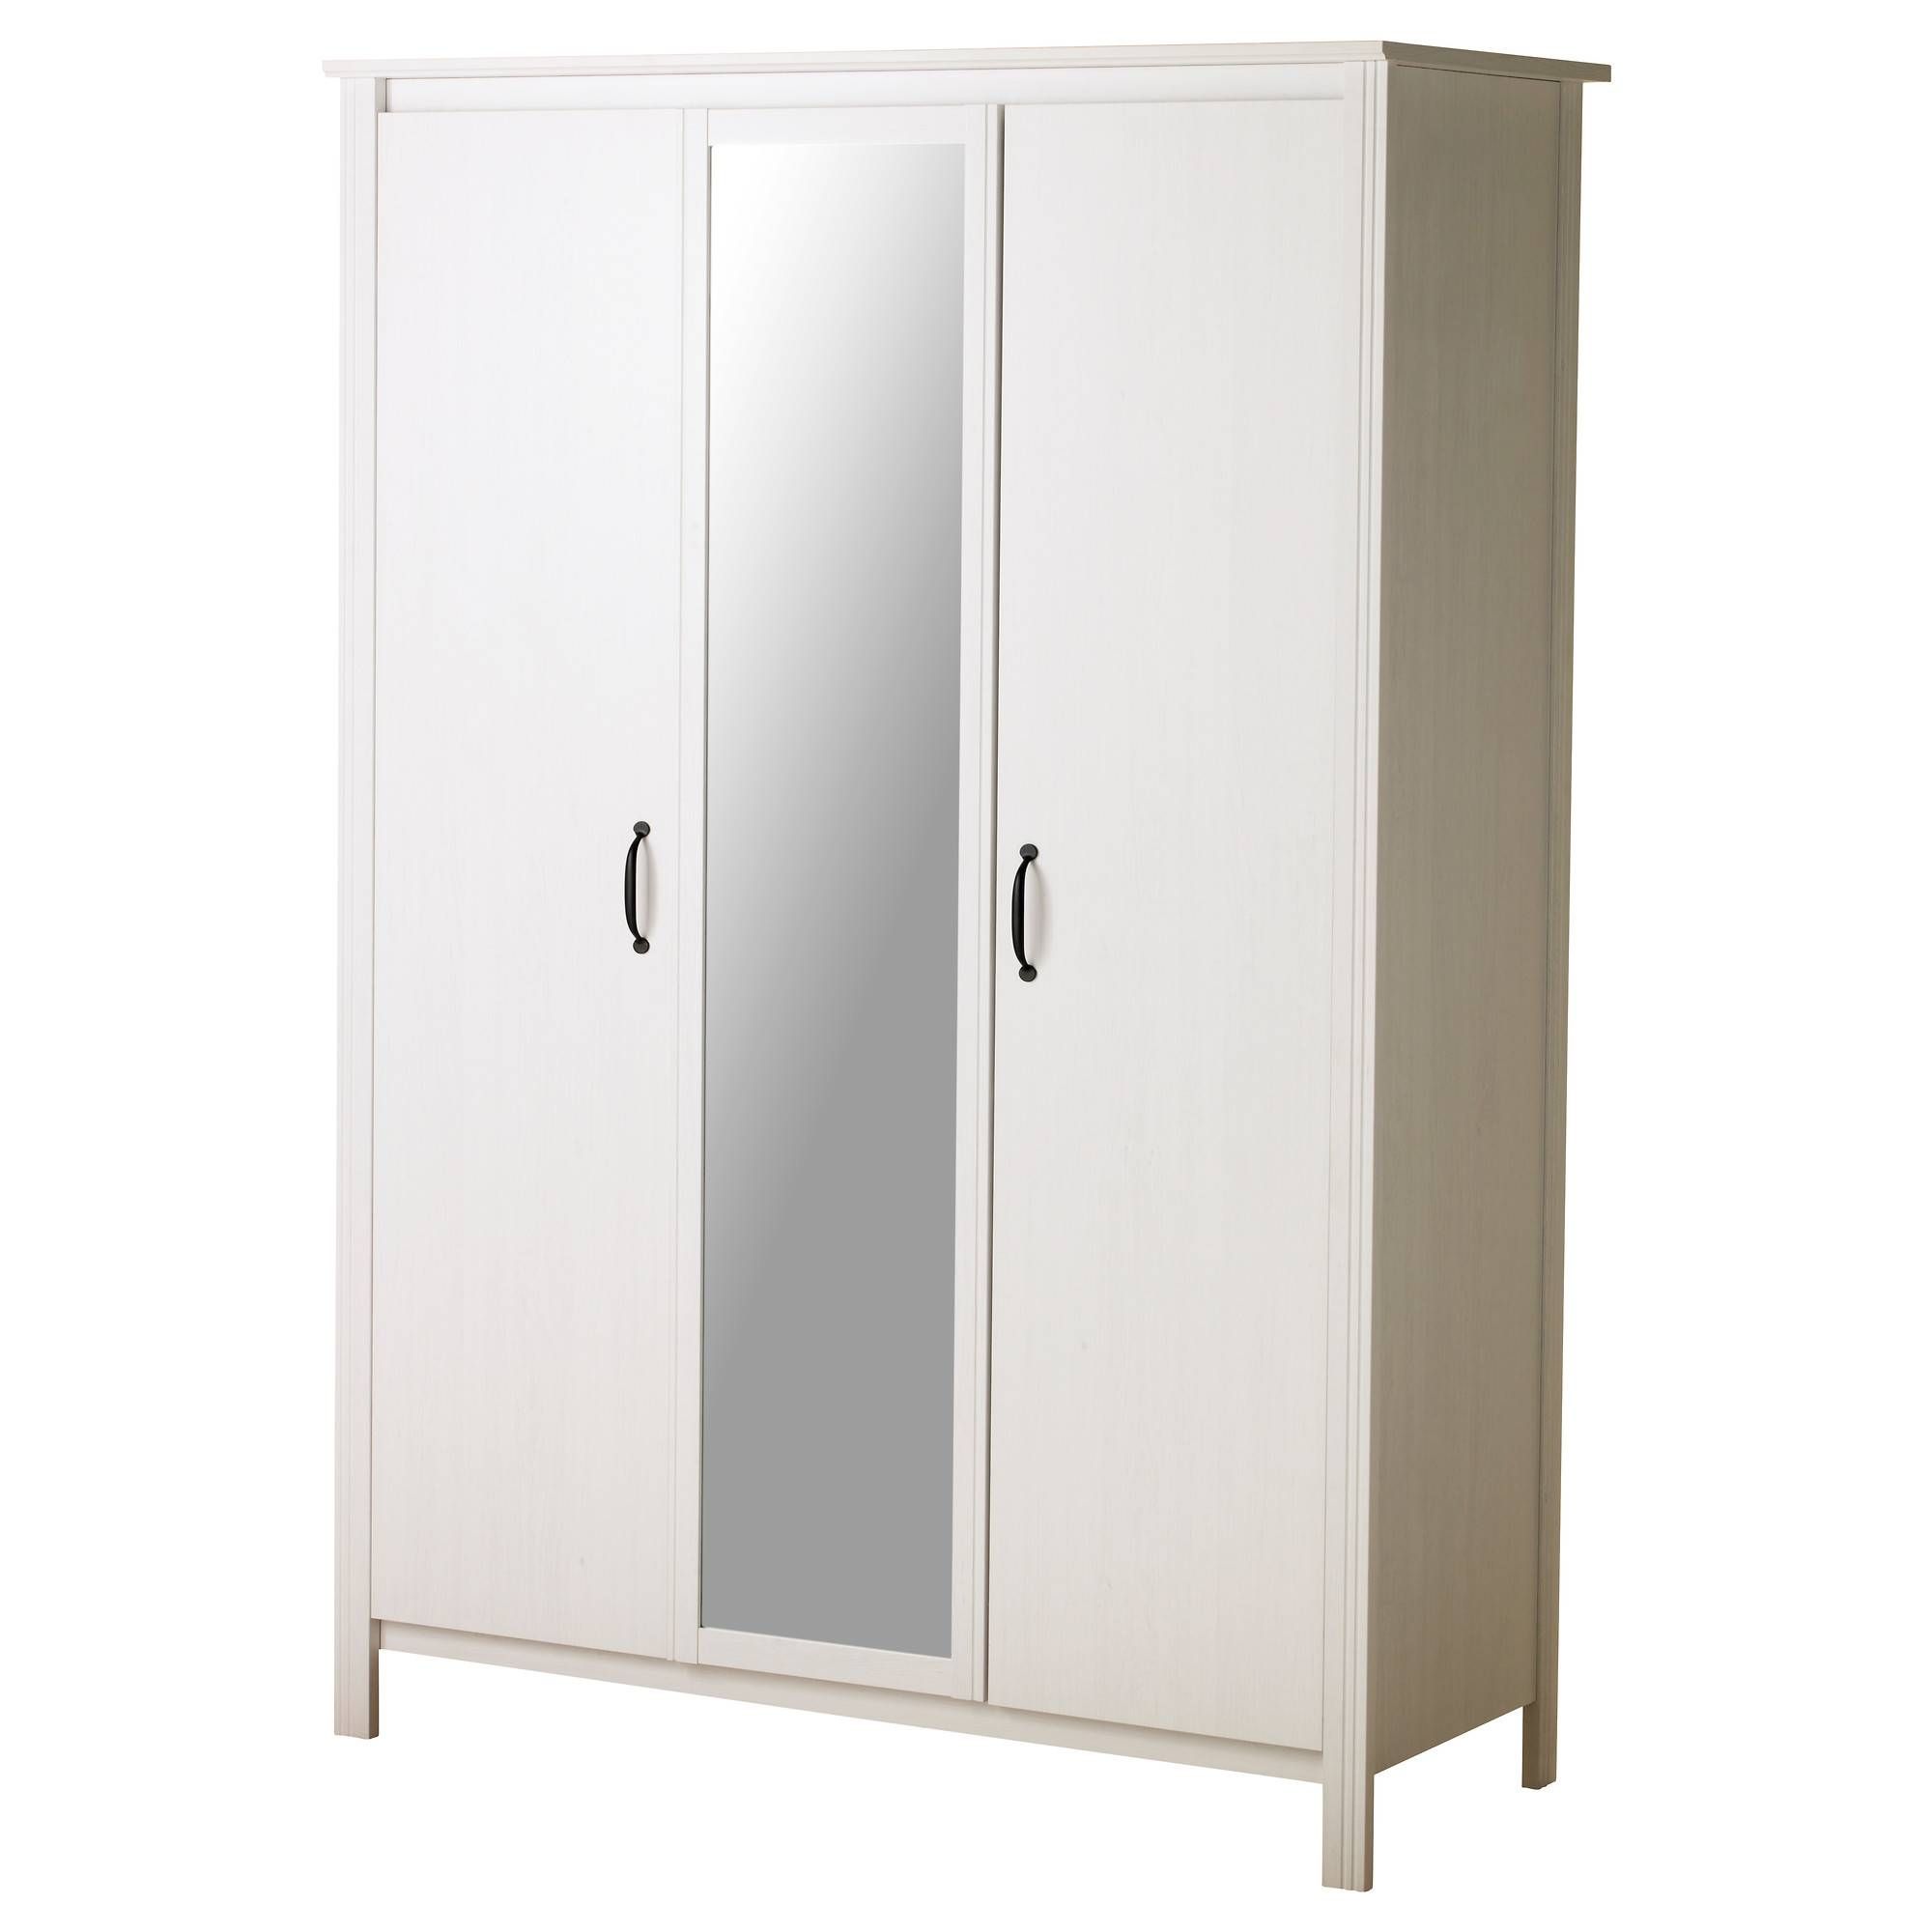 Wardrobes | Ikea Intended For Double Rail Wardrobe (Photo 1 of 30)